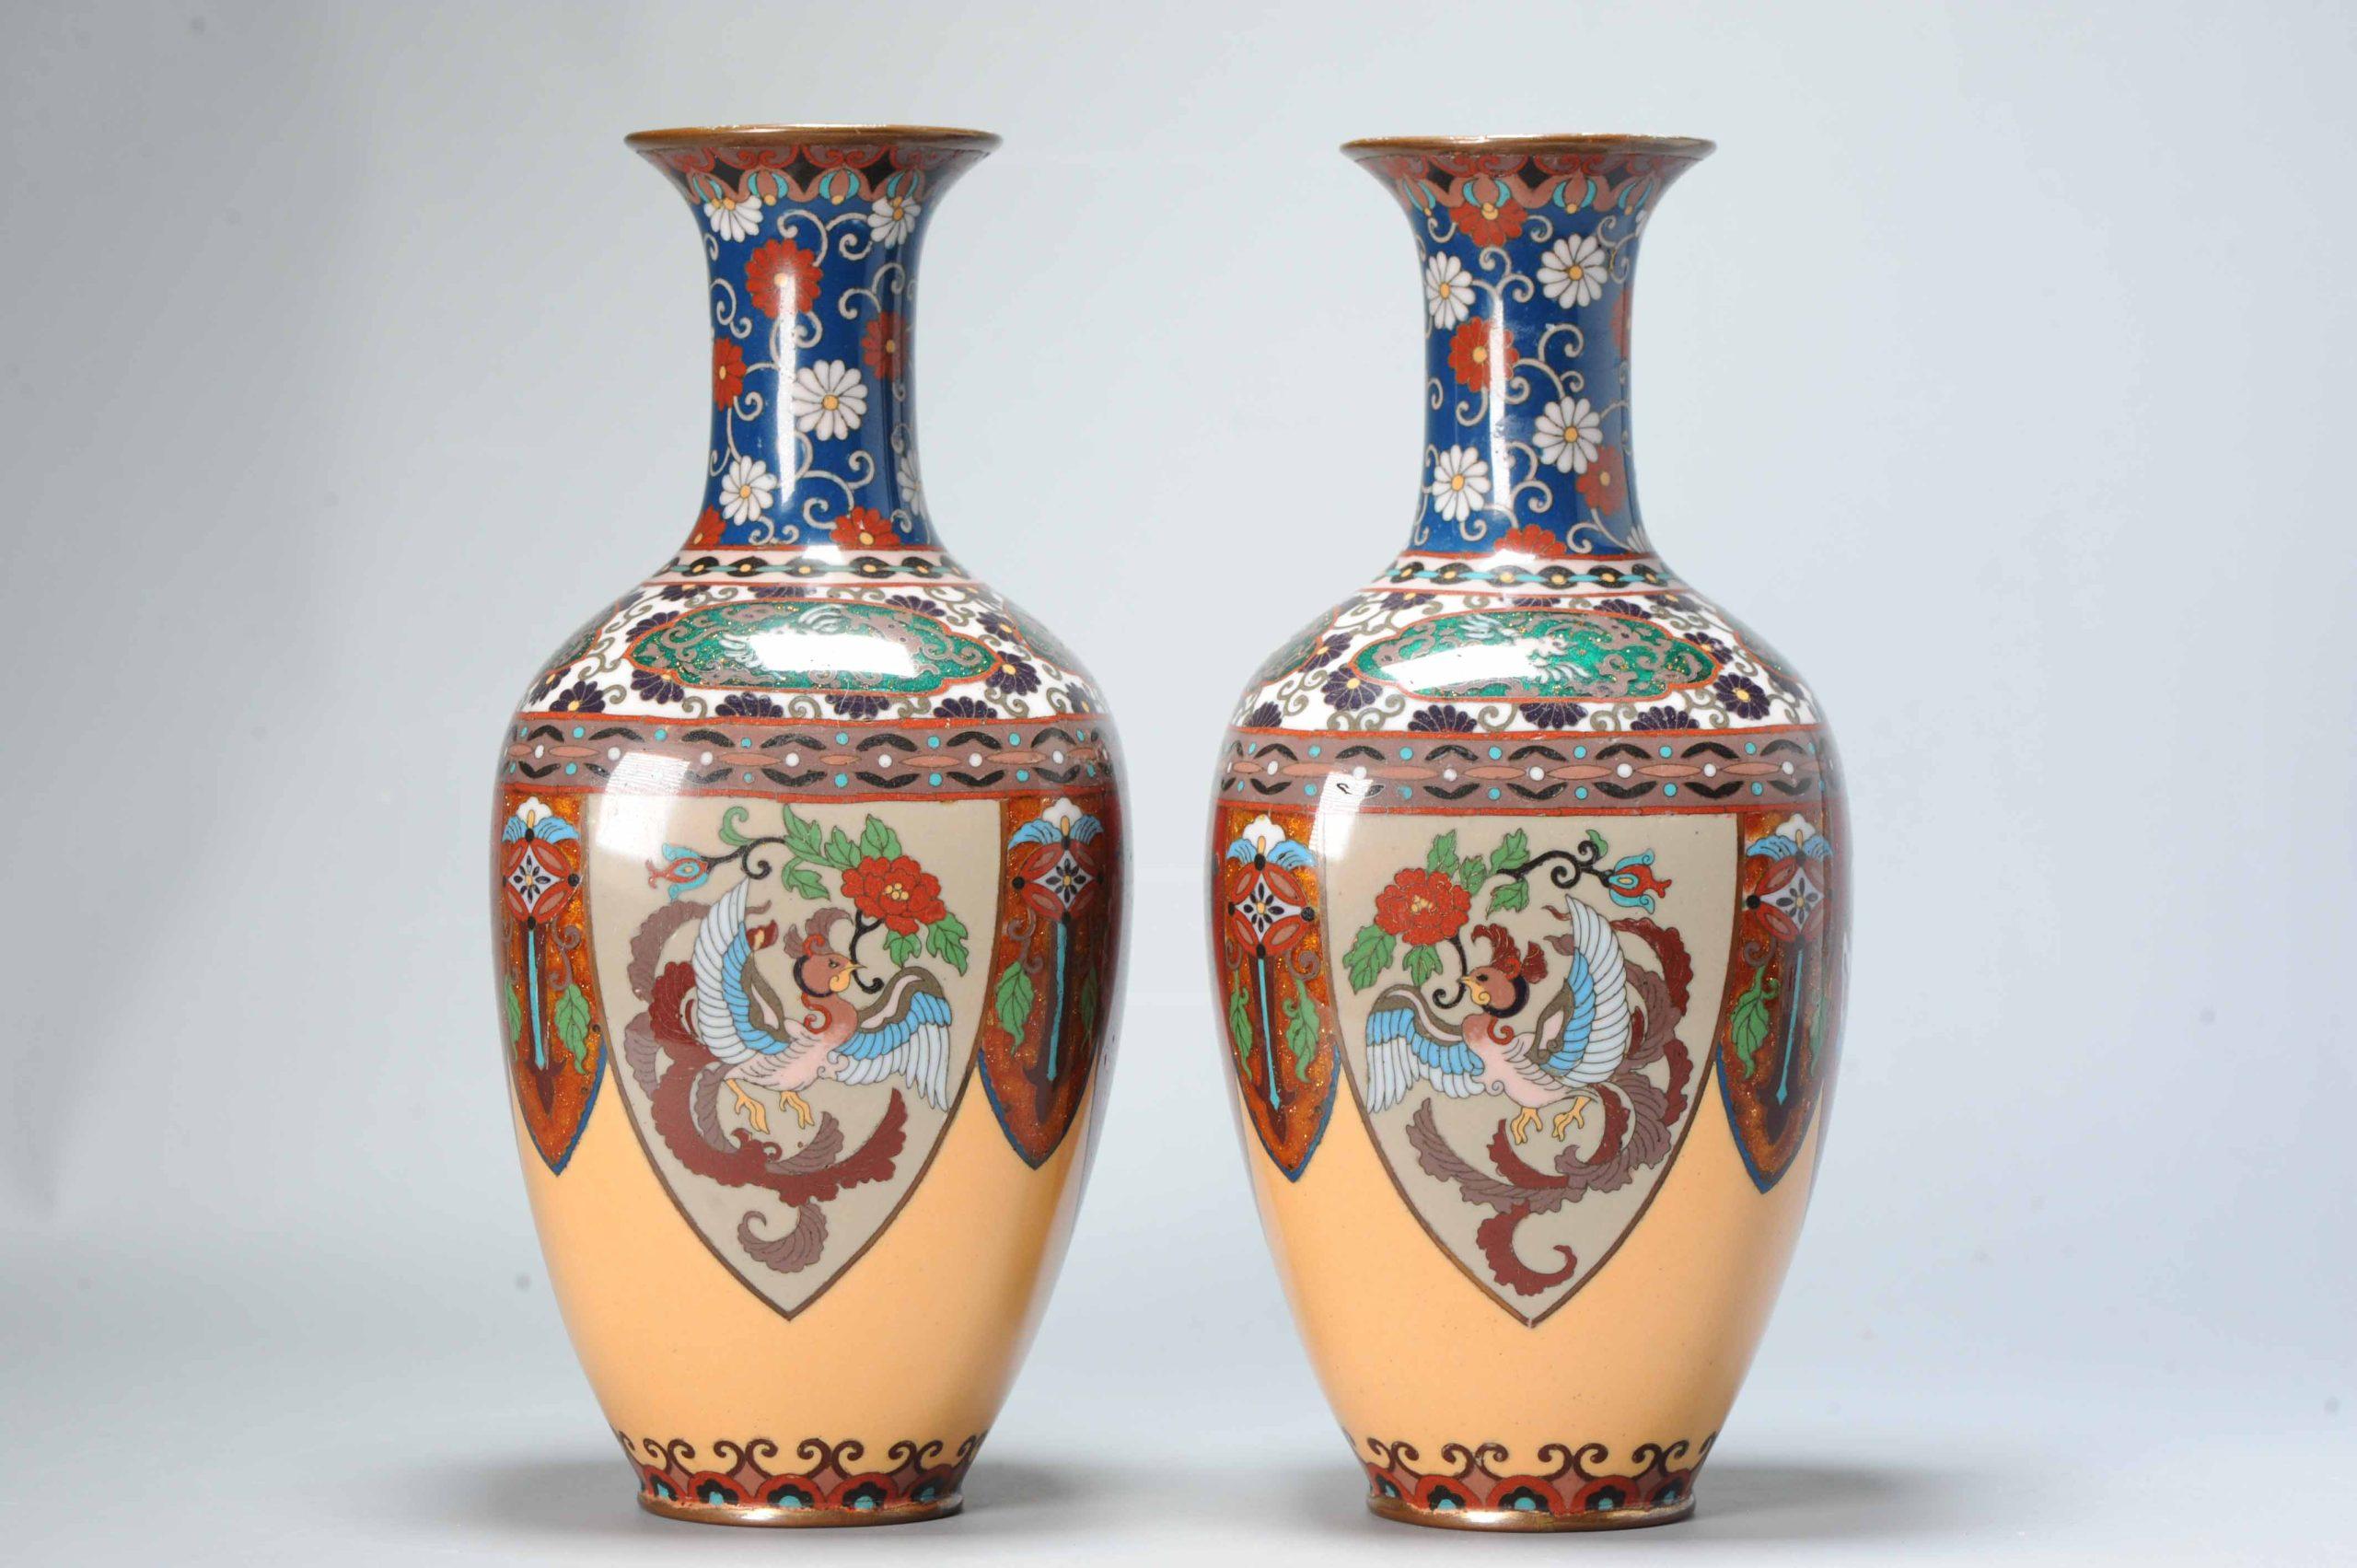 Top quality
Meiji era (1868-1912), 19th century
Each vase worked in gilt and wire of varying gauge with a mirrored design.

Condition
Vase one with some missing enamel/glaze spots and some scratches or bumspots. Vase 2 also with minimal